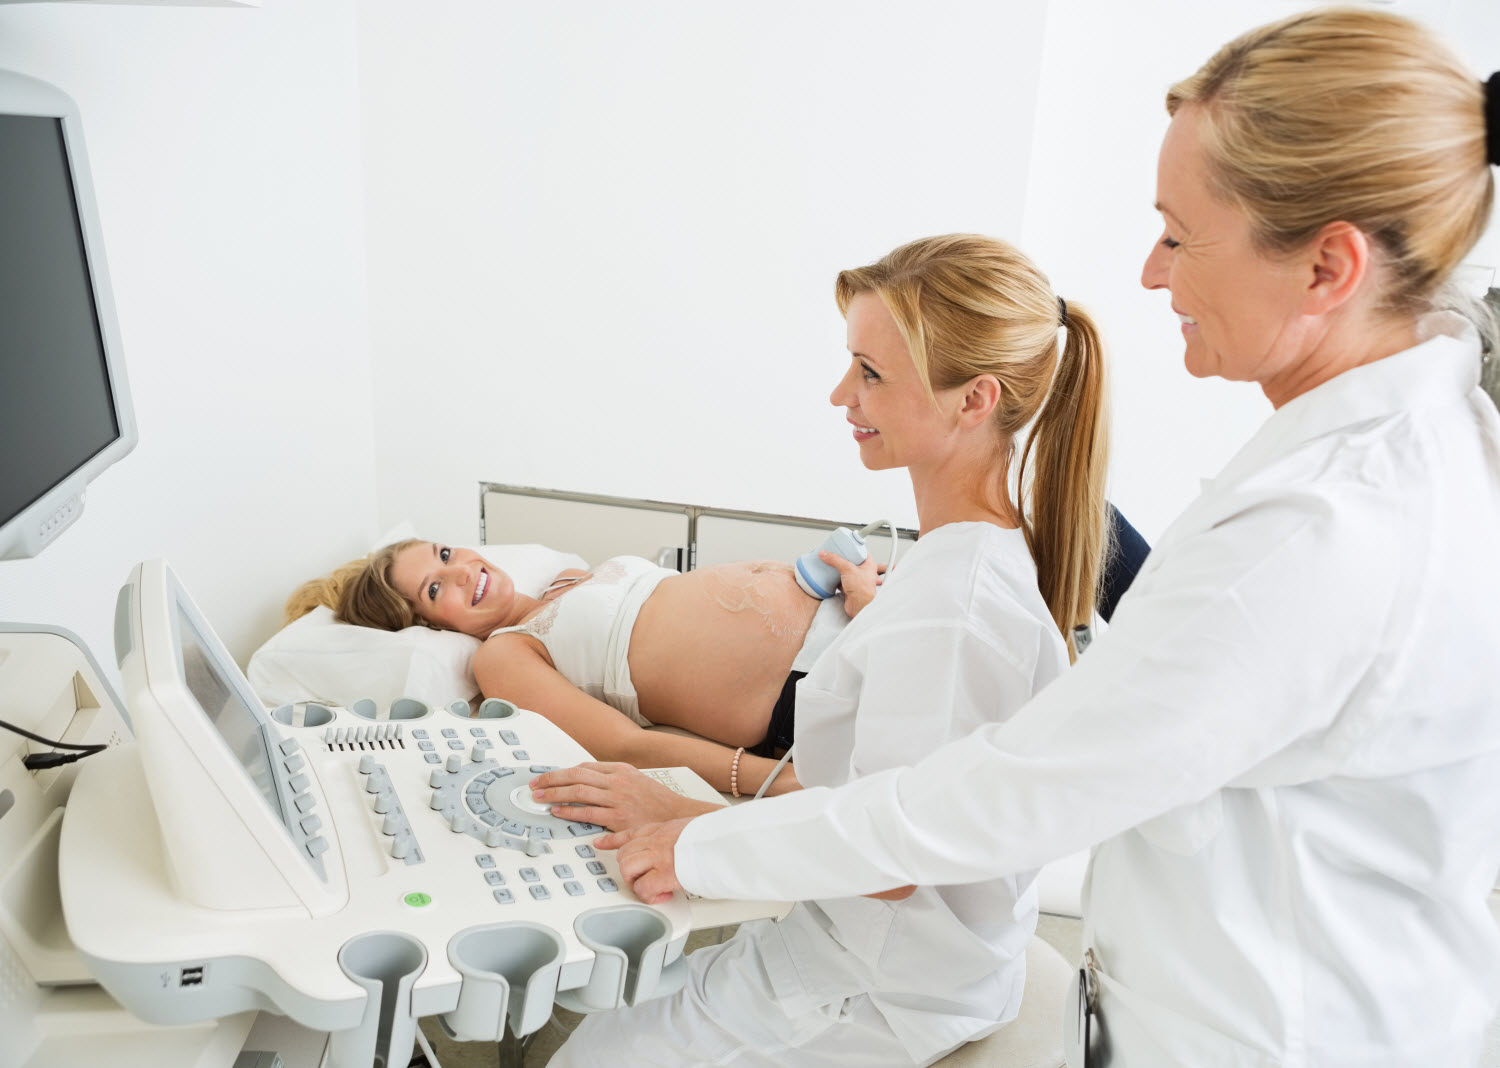 What is a Gynecology / Obstetric Nurse?